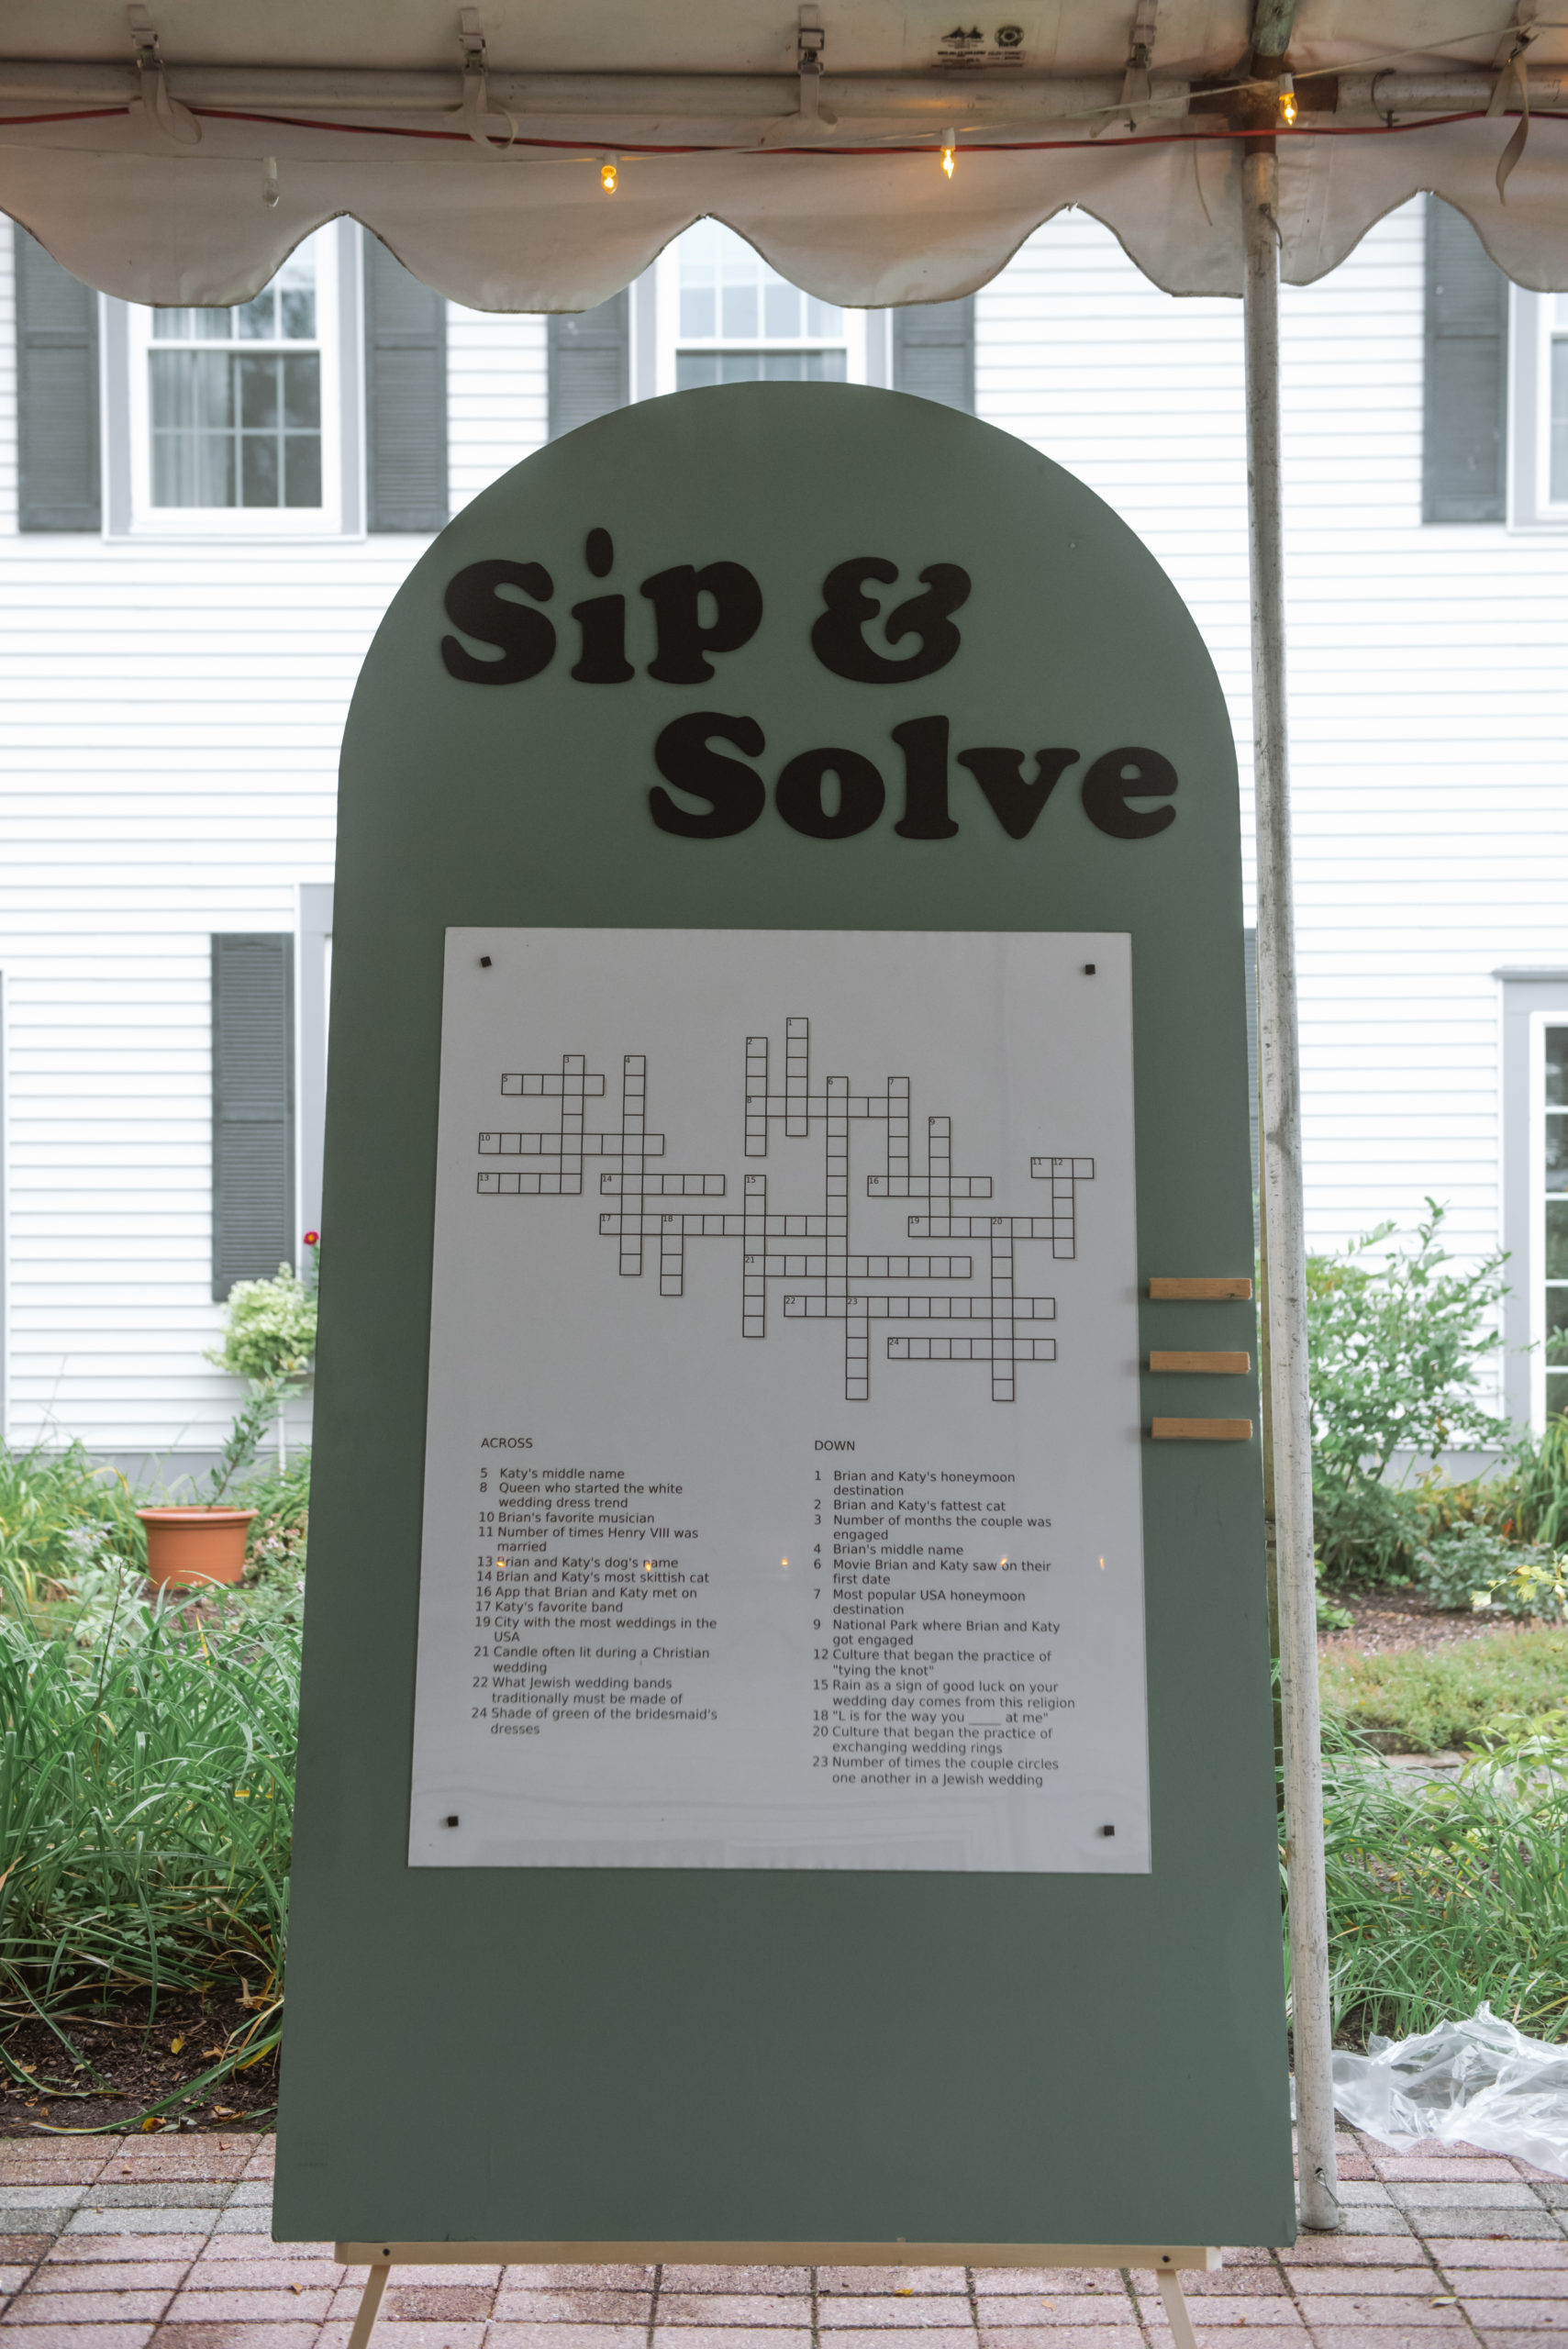 "Sip & Solve" written on a wooden arch-shaped board with a huge crossword puzzle full of the couple's details/trivia about them for cocktail hour guests to solve.